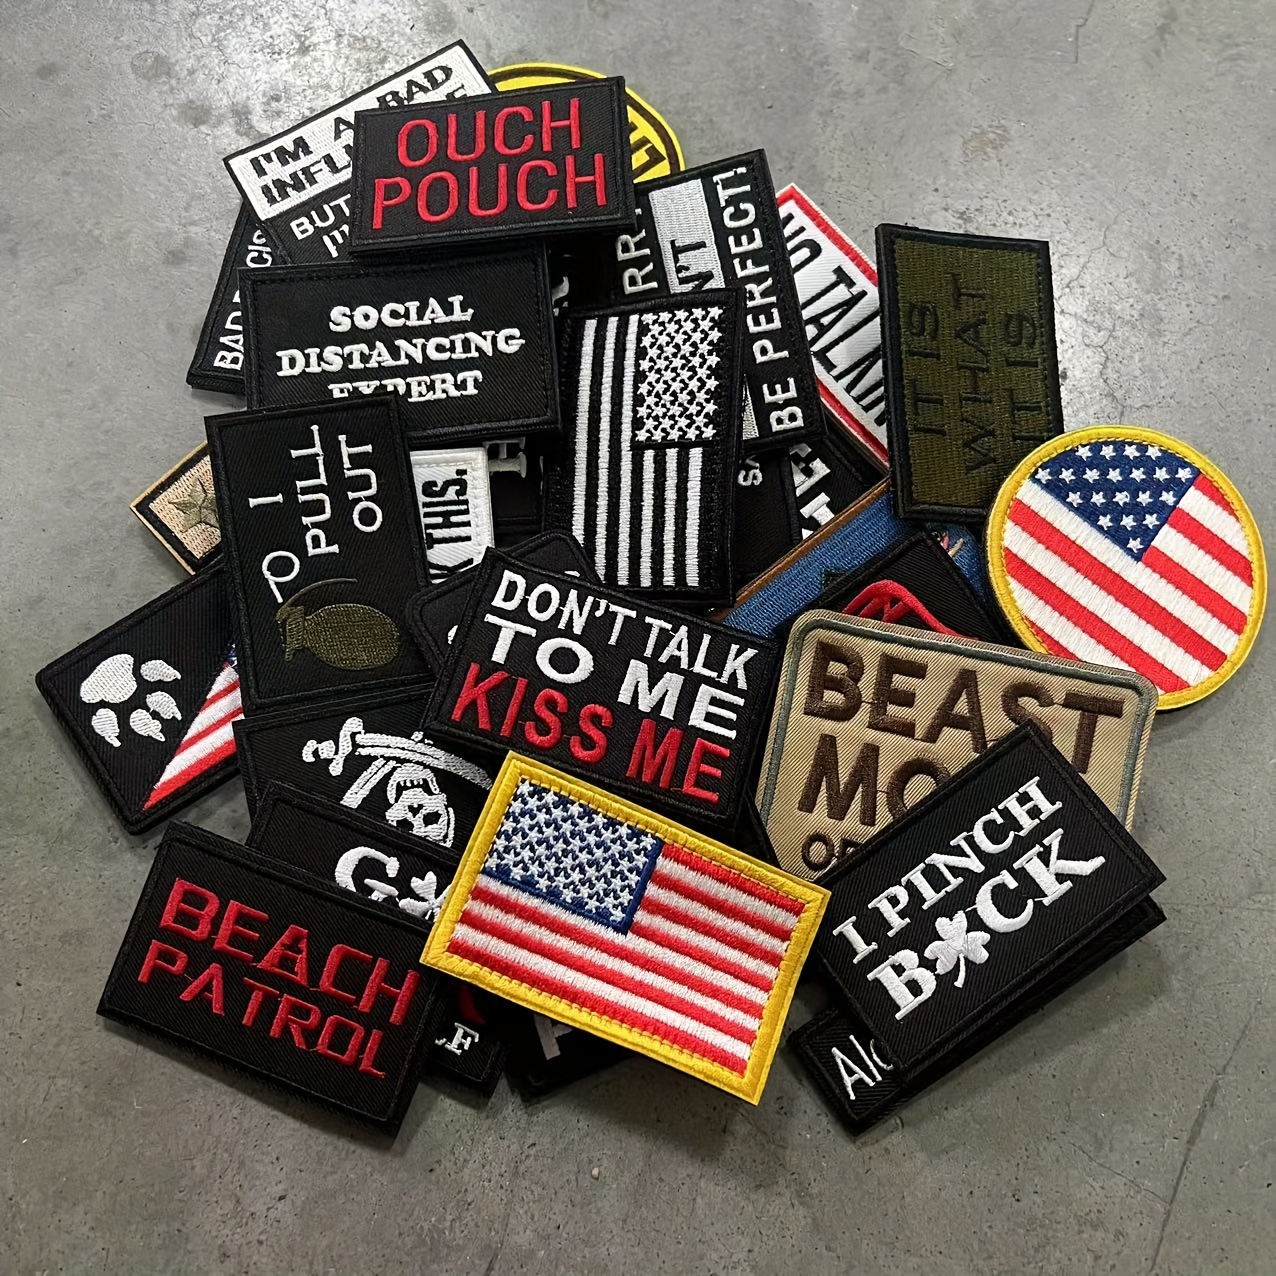 Butie 20 Pieces Random Funny Tactical Military Morale Patches Full Embroidery Patch Set for Caps,Bags,Backpacks,Clothes,Vest,Military Uniforms